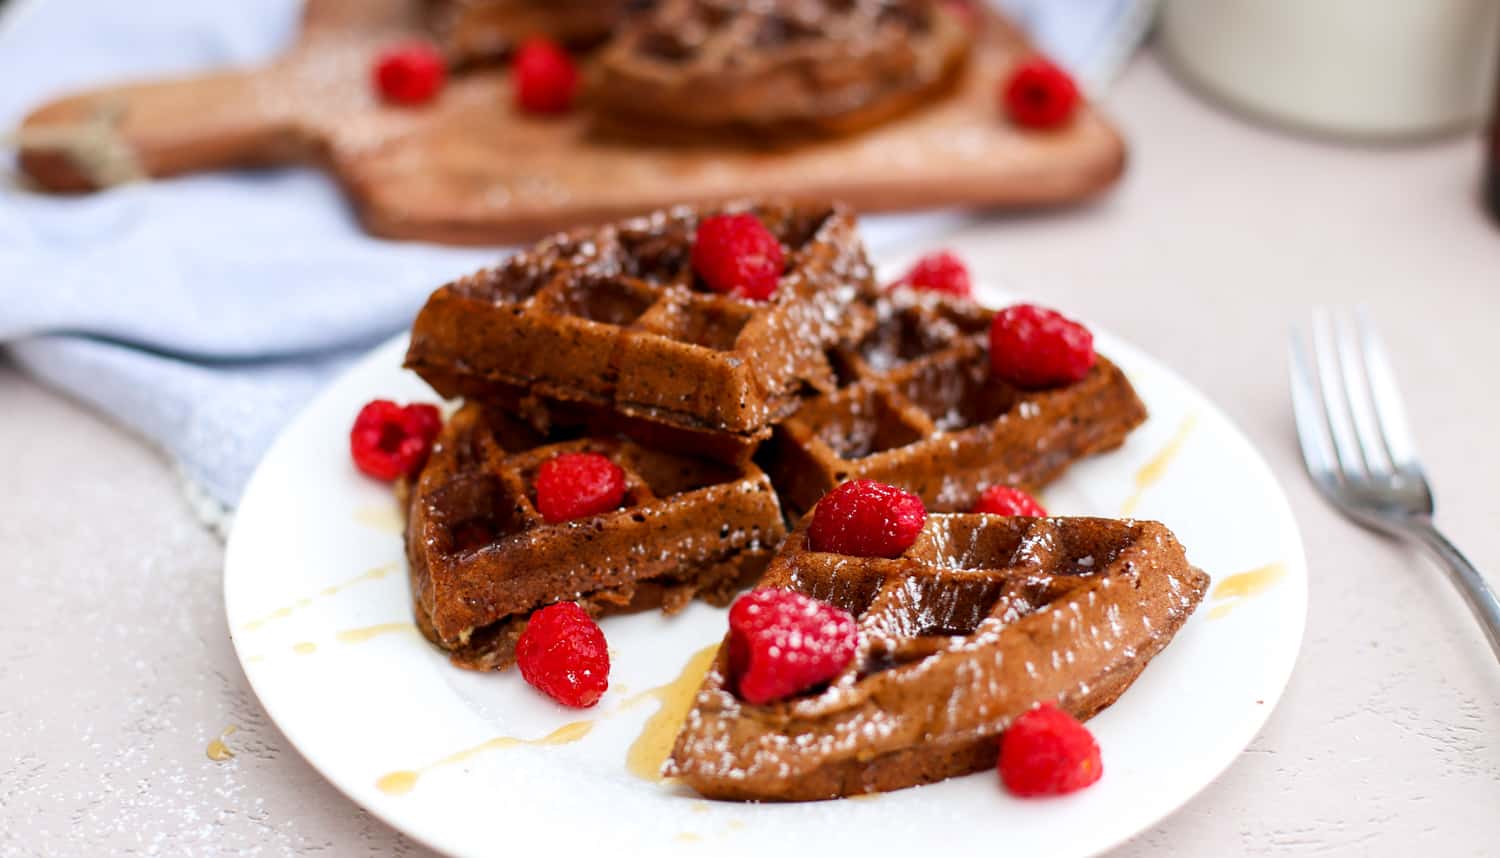 Chocolate waffles broken up and stacked on a white plate with raspberries on top and drizzled with syrup.